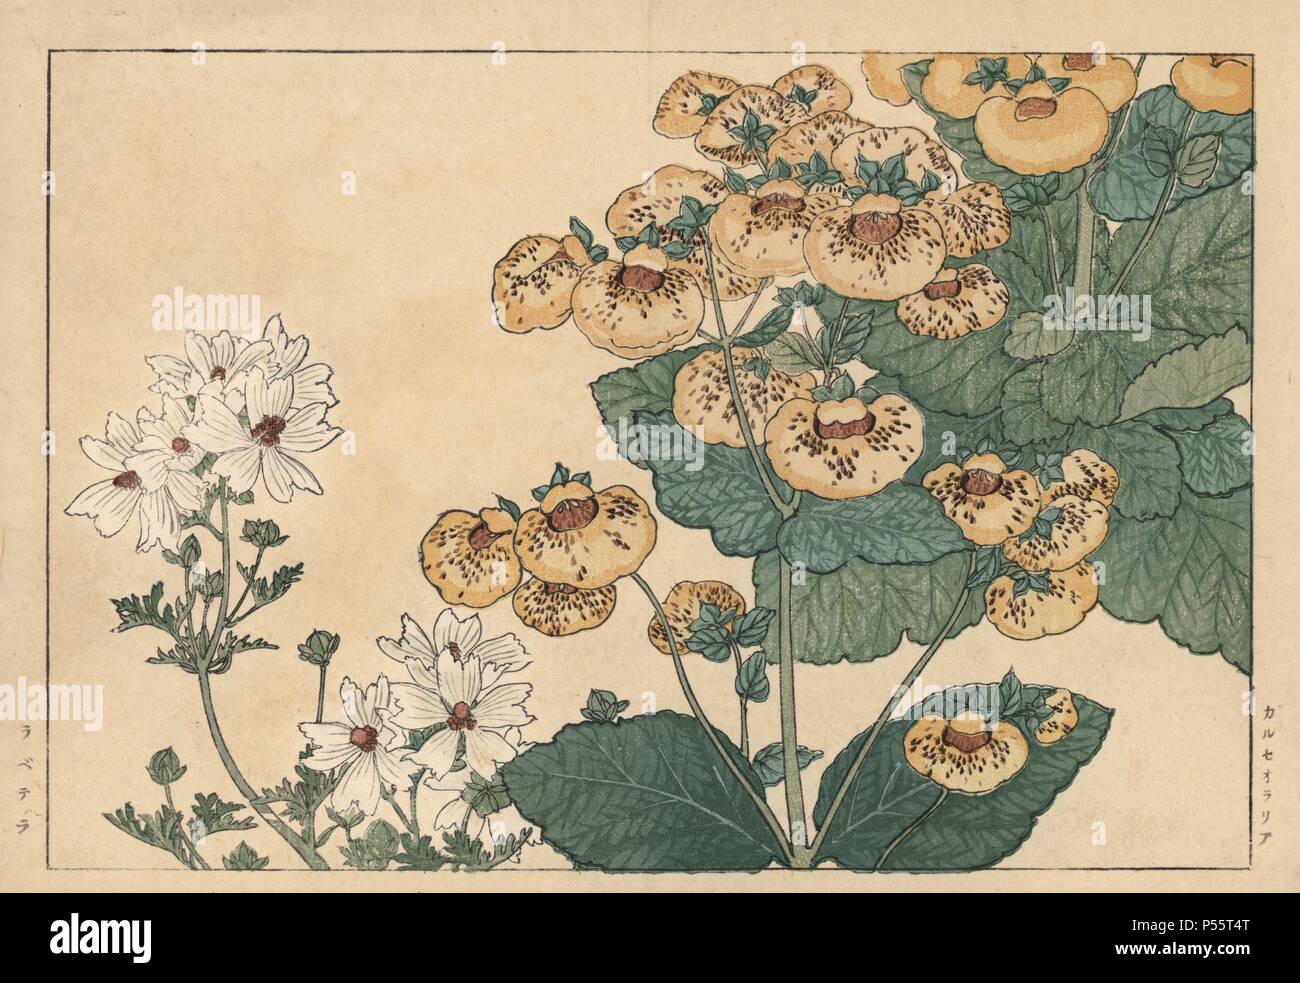 Calceolaria, Lady's purse, Slipper or Pocketbook flower and Lavatera, rose mallow. Handcoloured woodblock print from Konan Tanigami's 'Seiyou Sokazufu' (Pictorial Album of Western Plants and Flowers: Spring), Unsodo, Kyoto, 1917. Tanigami (1879-1928) depicted 125 varieties of garden plants through the four seasons. Stock Photo